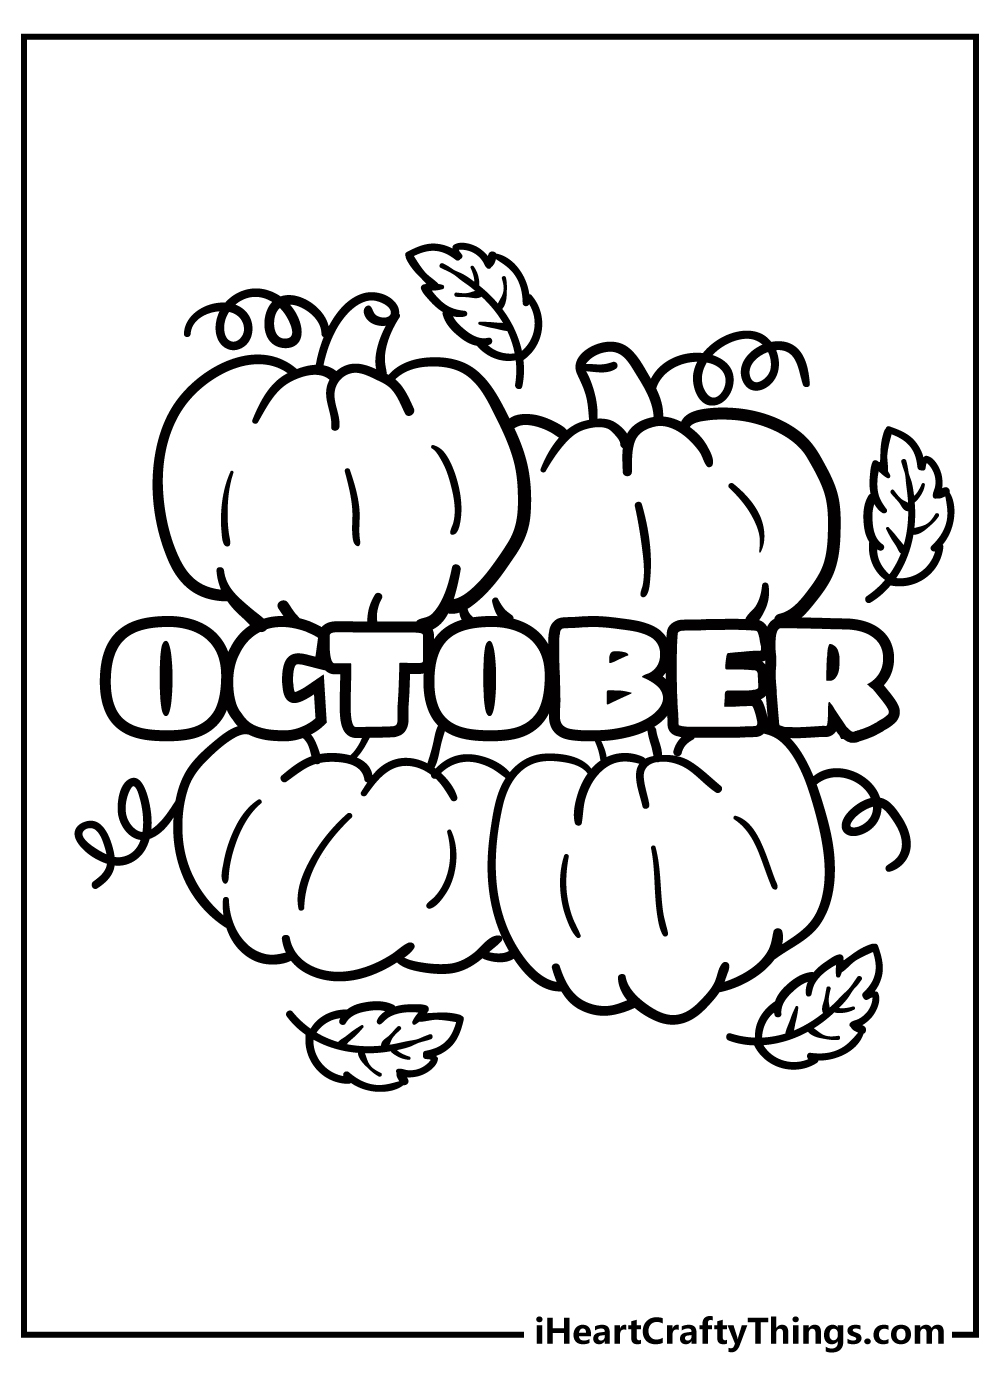 October Coloring Pages free pdf download